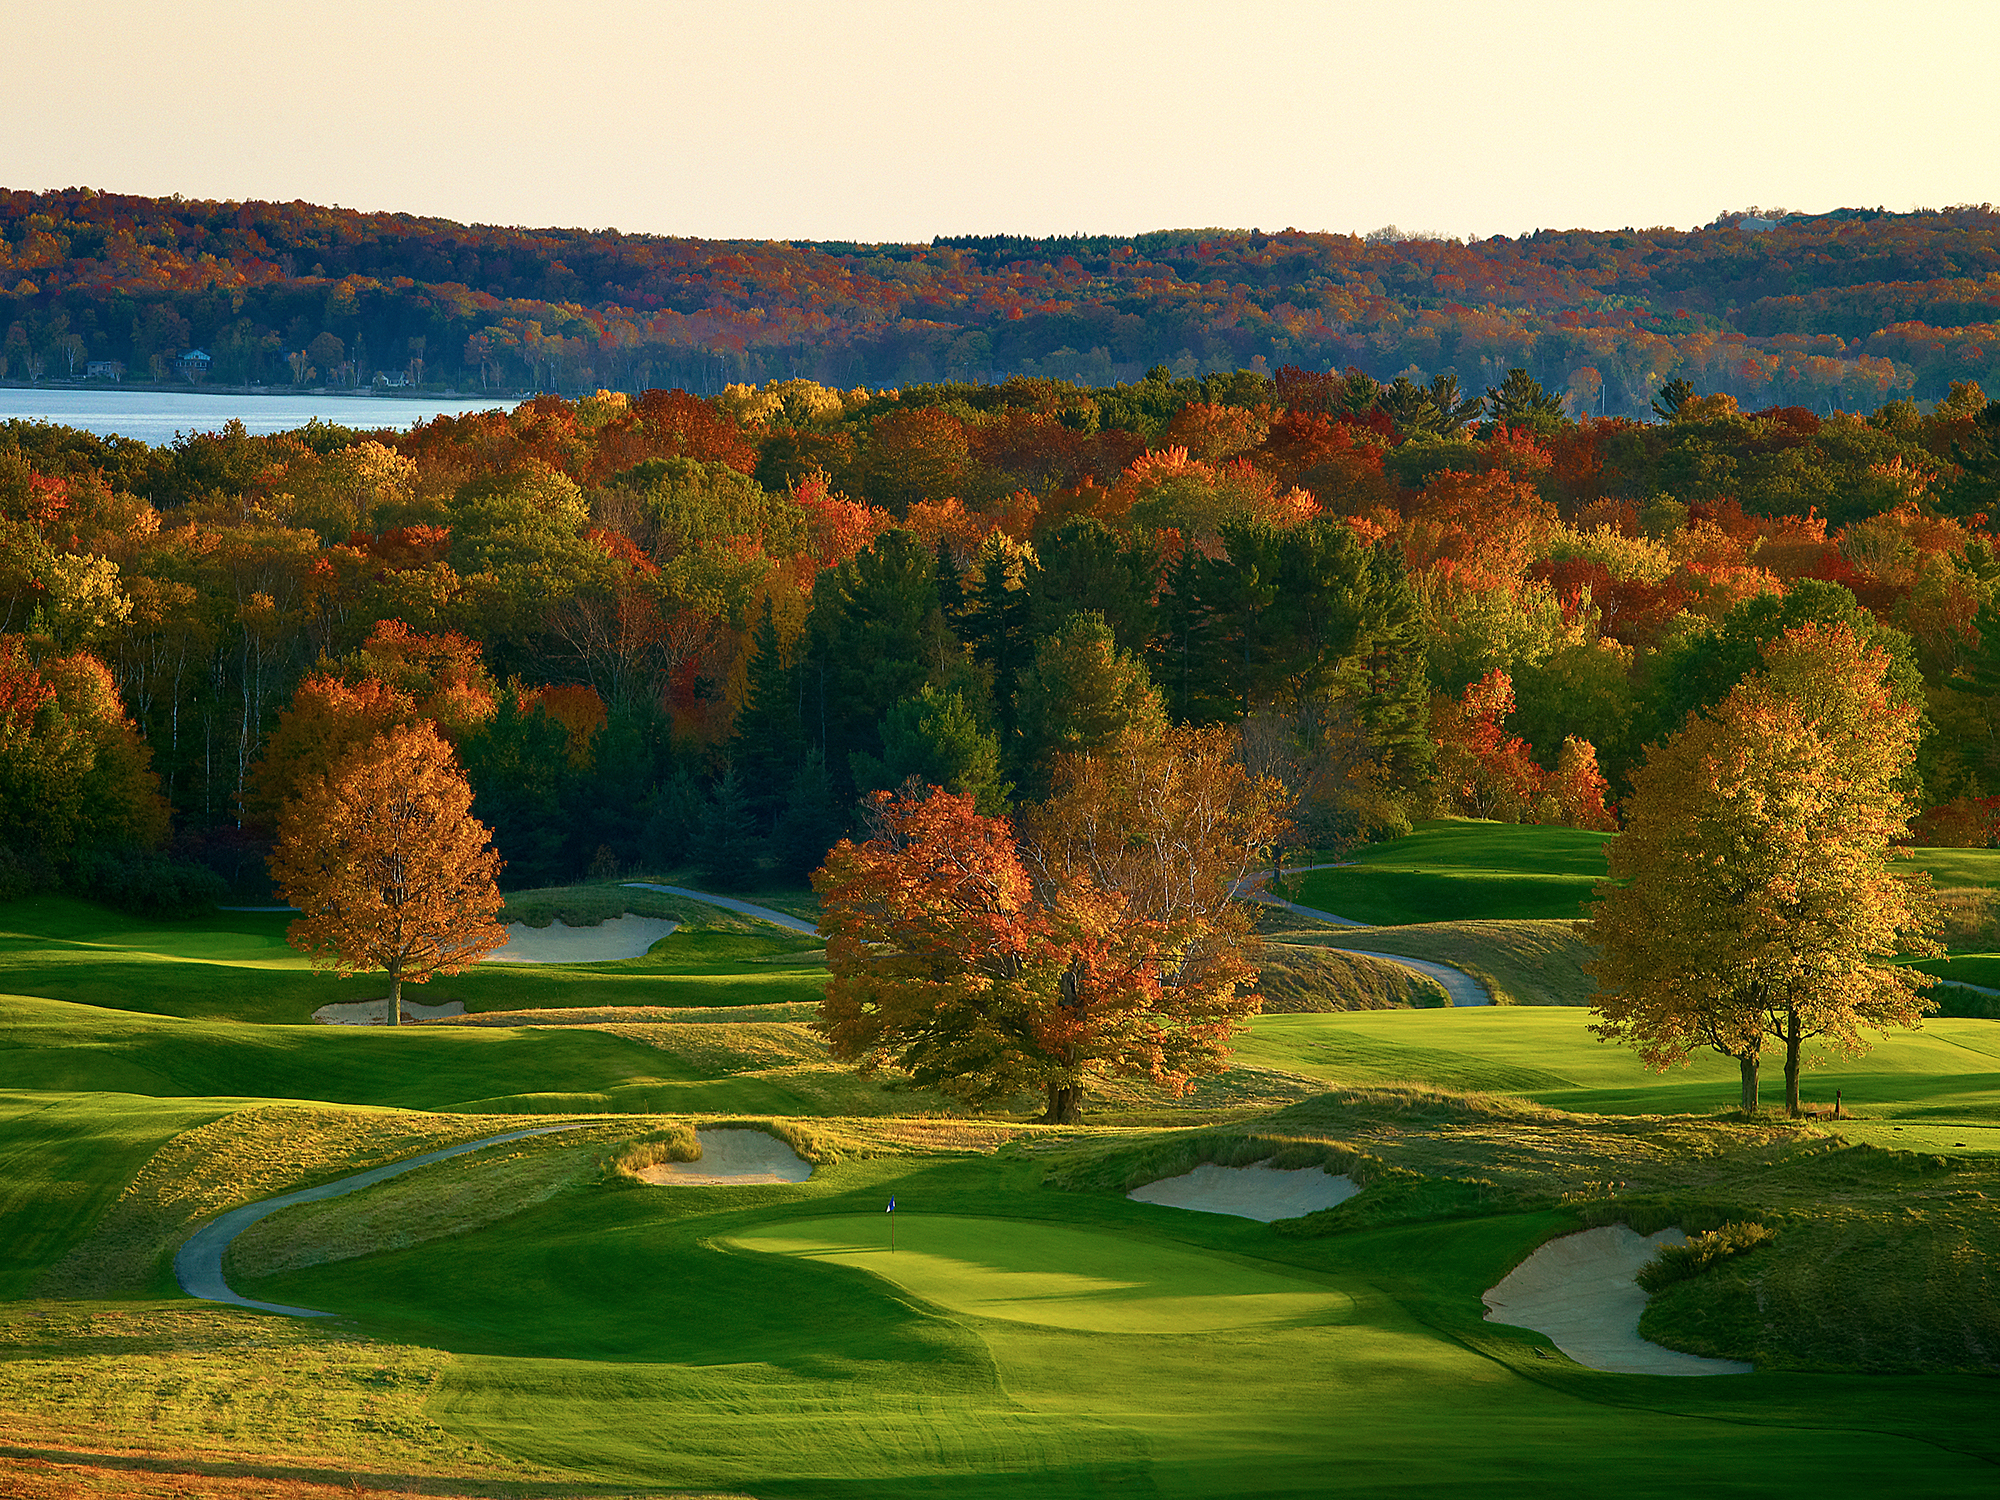 Crystal Downs Country Club | Courses | GolfDigest.com